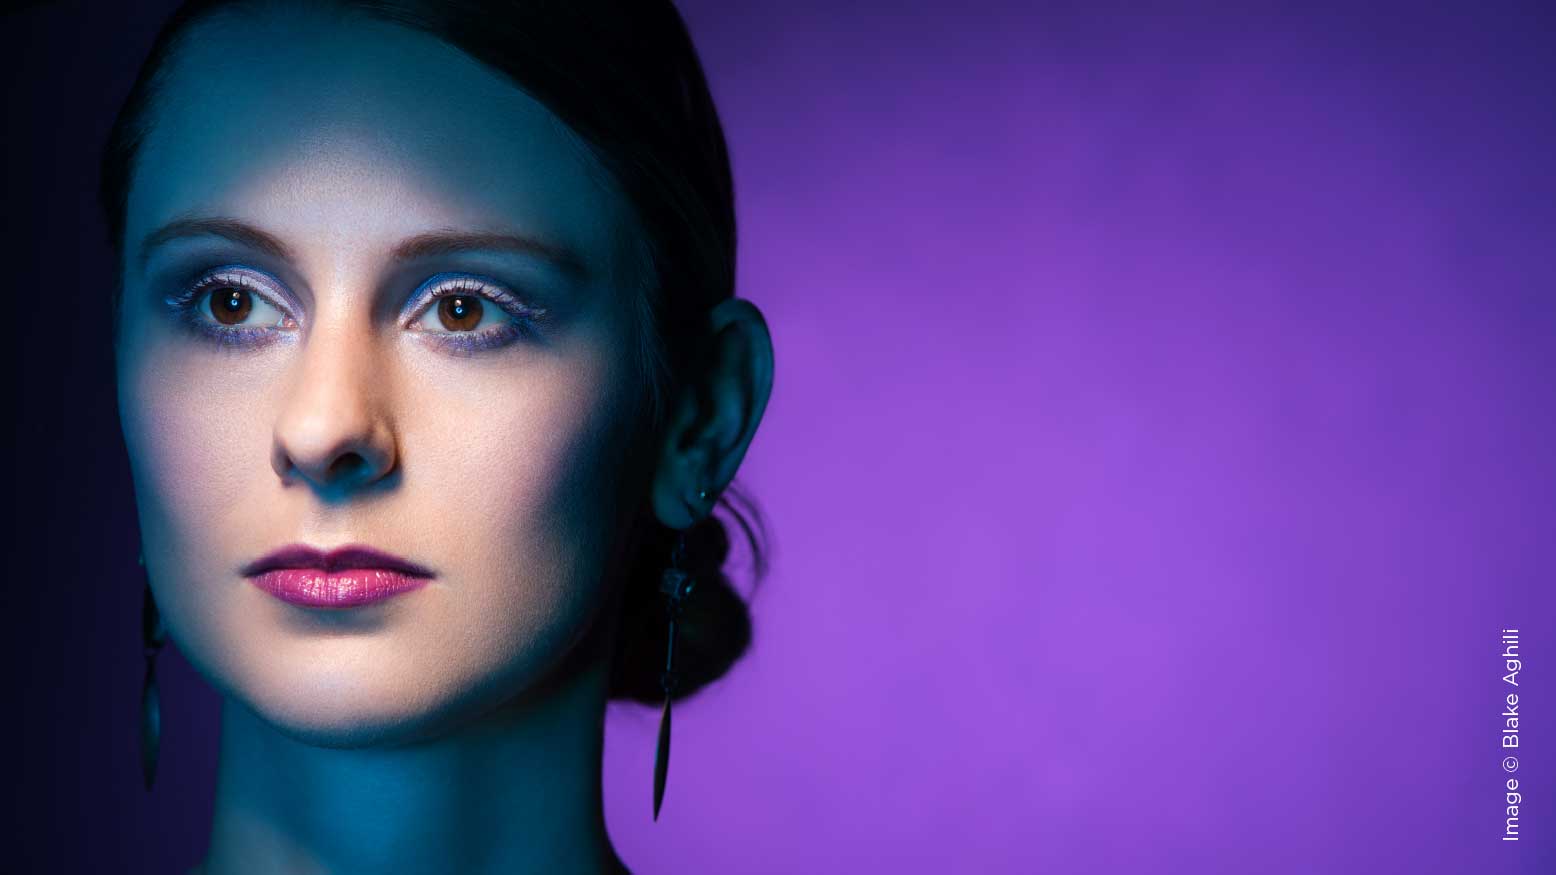 Creating Colored Shadows With Gels with Blake Aghili